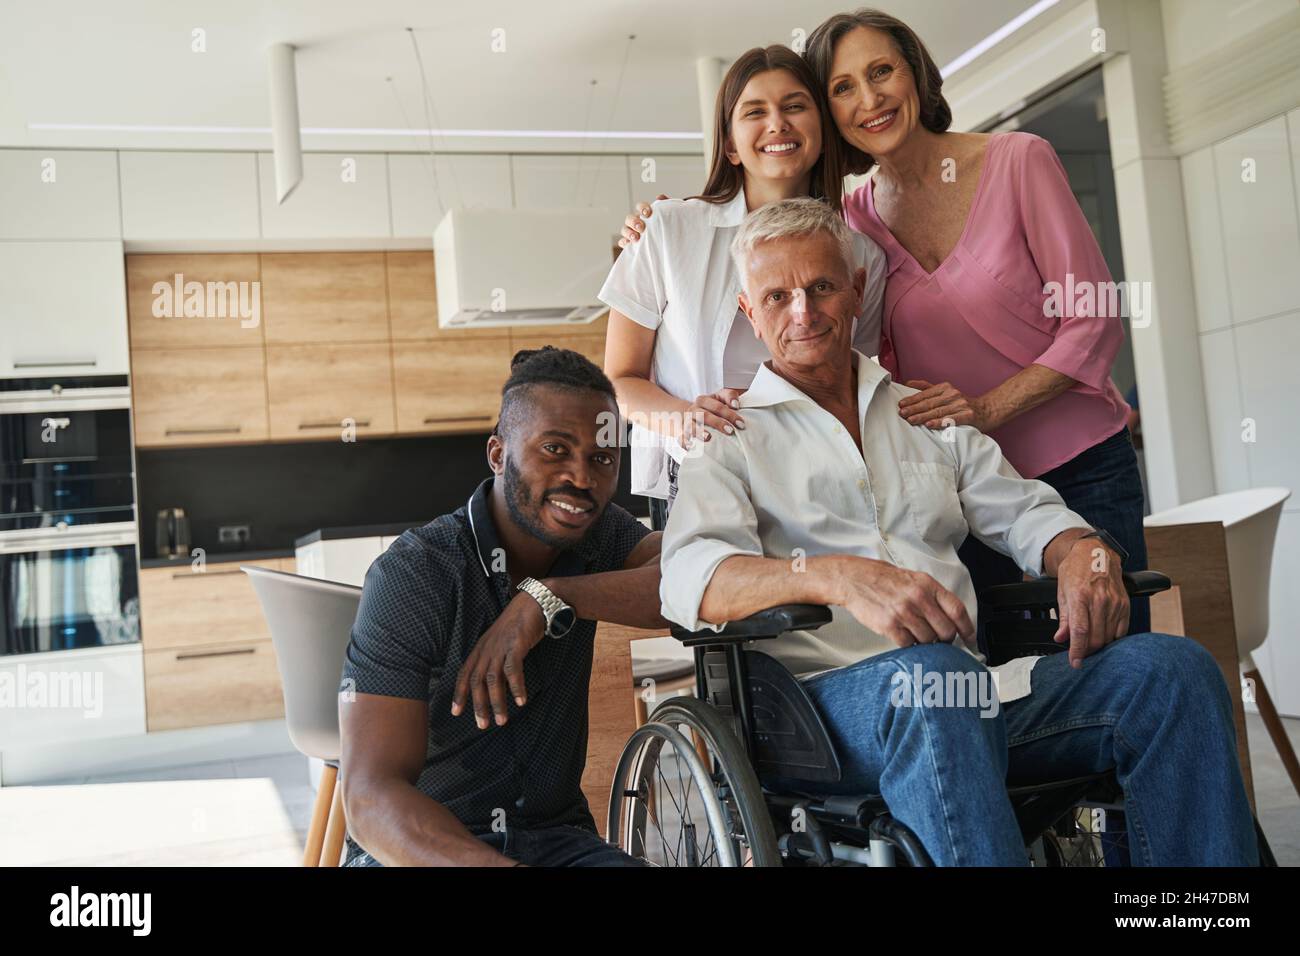 Relatives are supporting man with physical disability Stock Photo